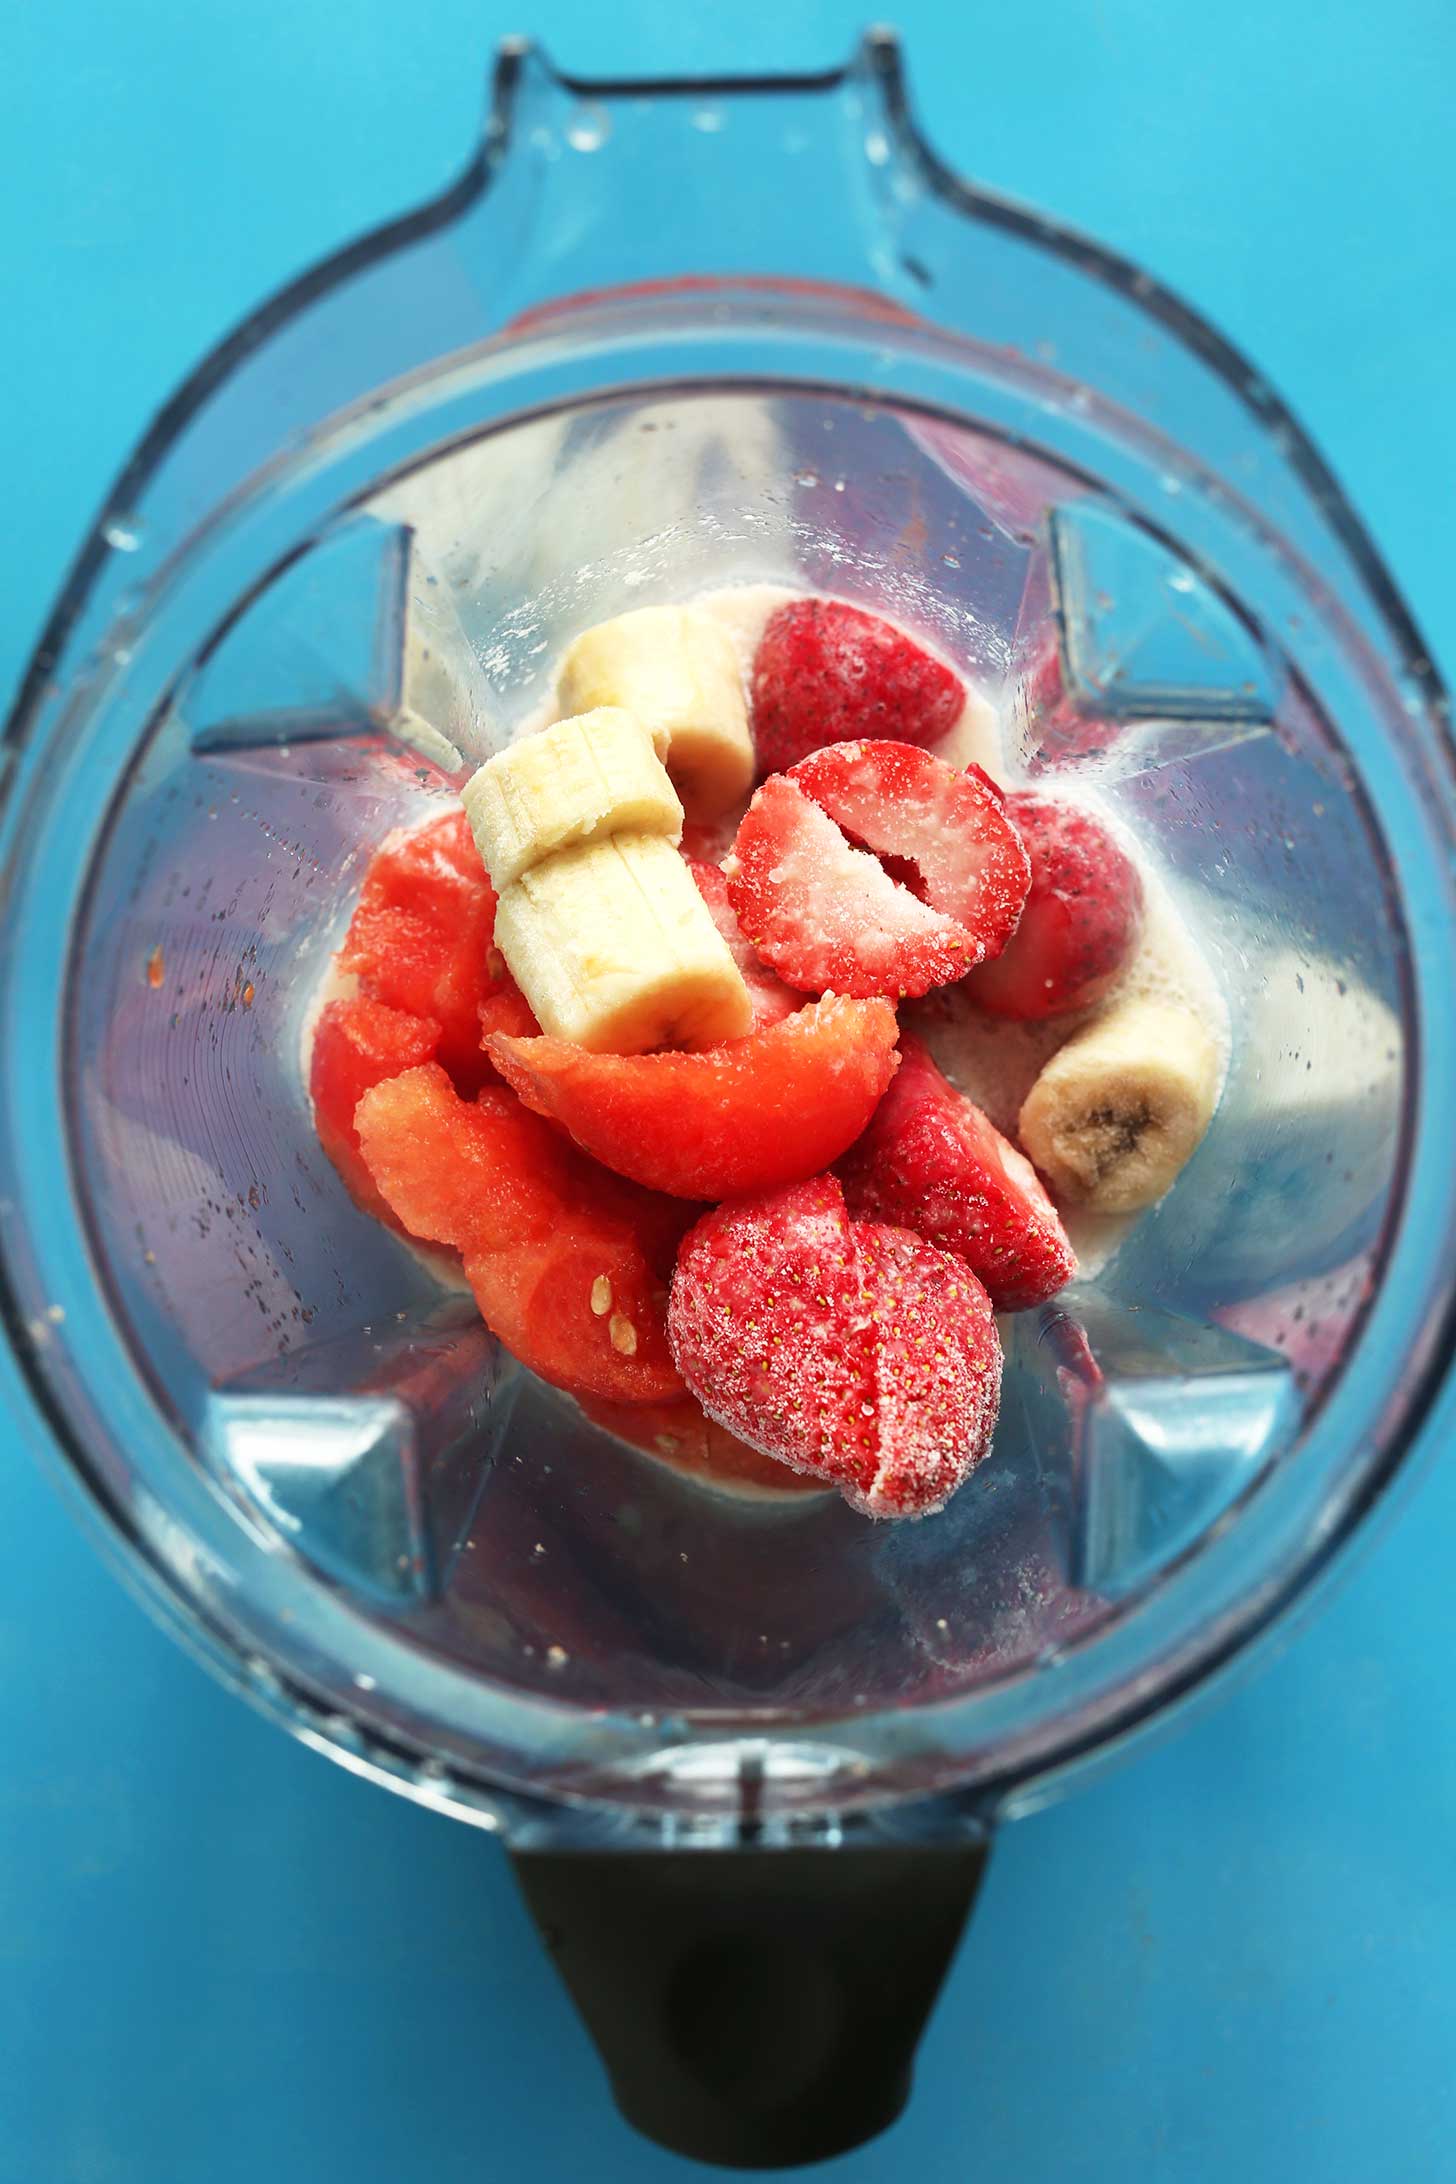 Watermelon, strawberries, and banana in a blender for making a refreshing smoothie